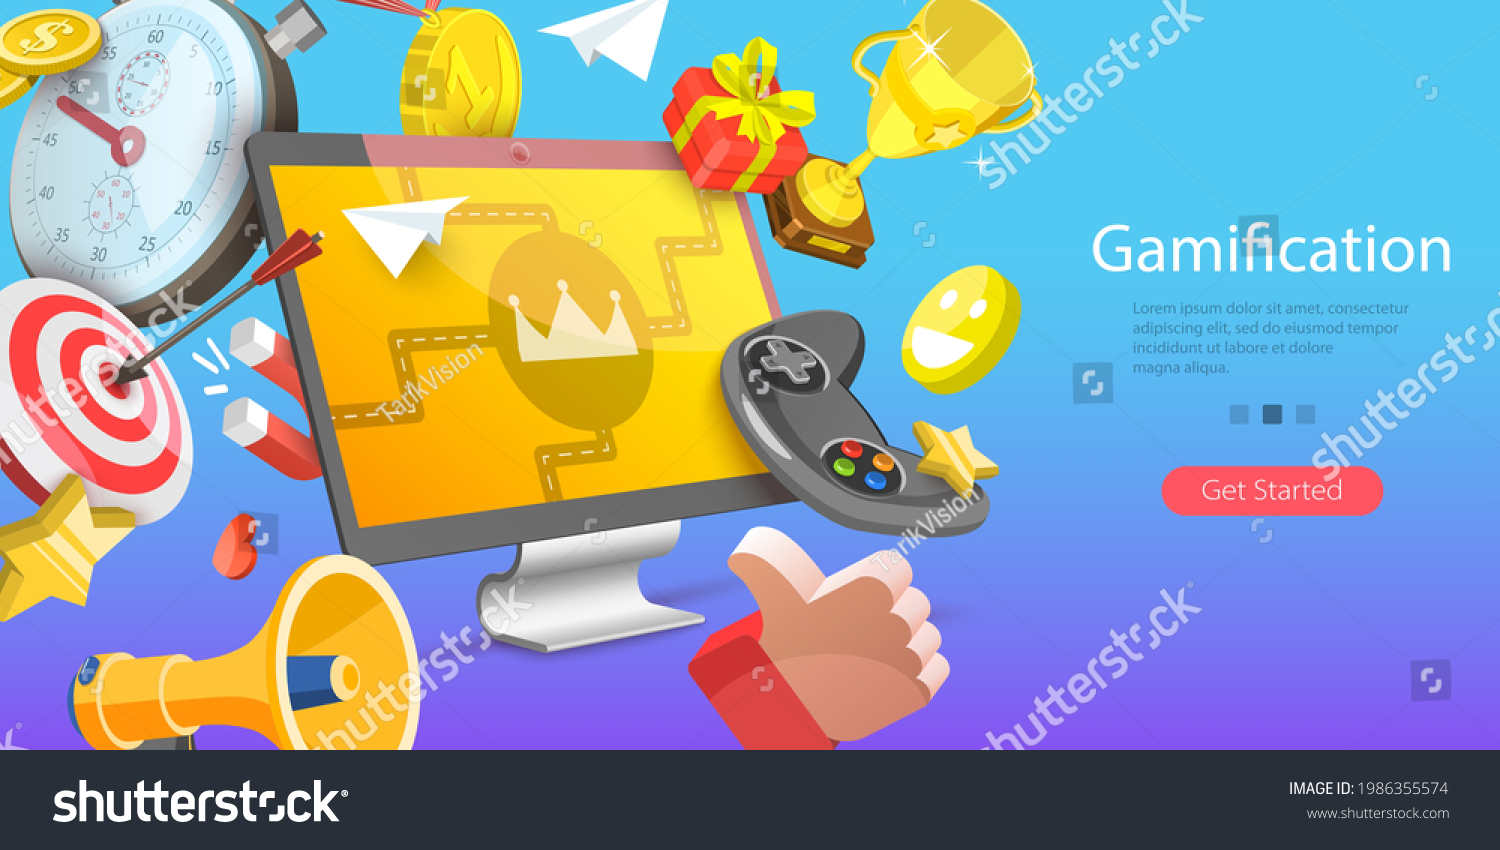 SVG of 3D Isometric Flat Vector Conceptual Illustration of Online Gamification Campaign, Creating Interactive Content for Engaging Customers svg